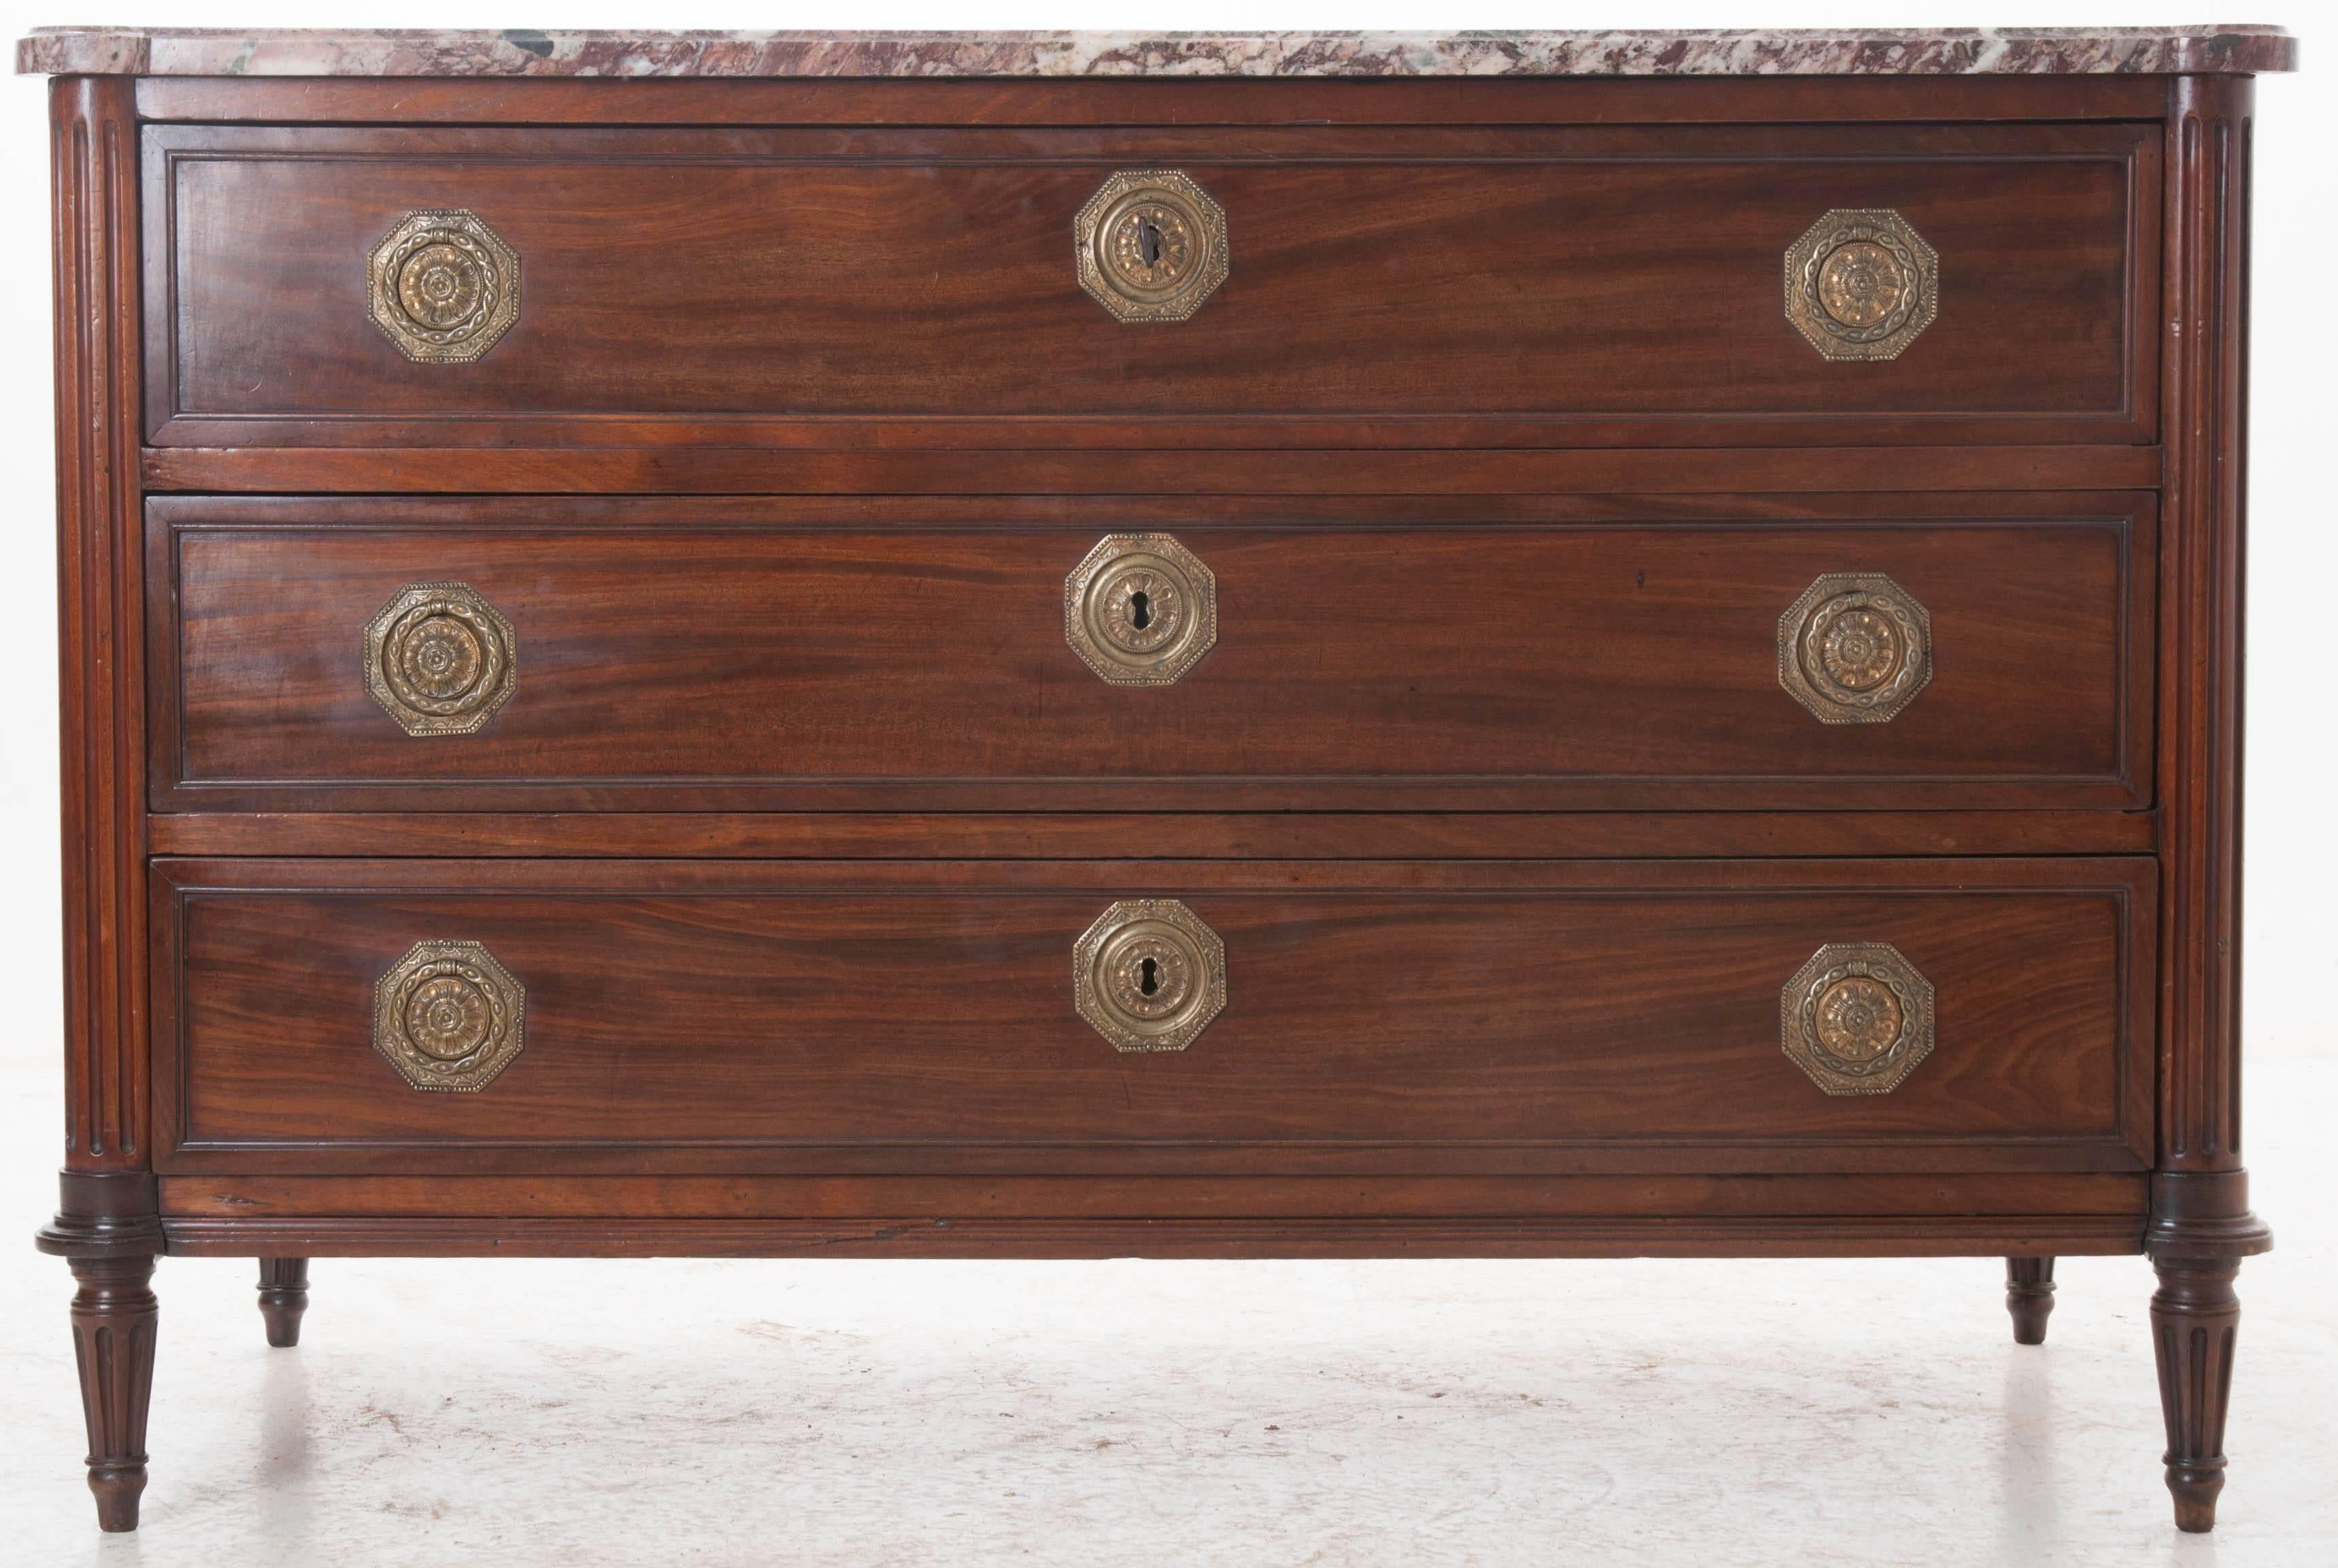 An extremely handsome French mahogany three-drawer Louis XVI commode with marble top. The extraordinary shaped violet marble top is original to the piece and in wonderful condition. The three lockable drawers are outfitted with beautiful, ornate,